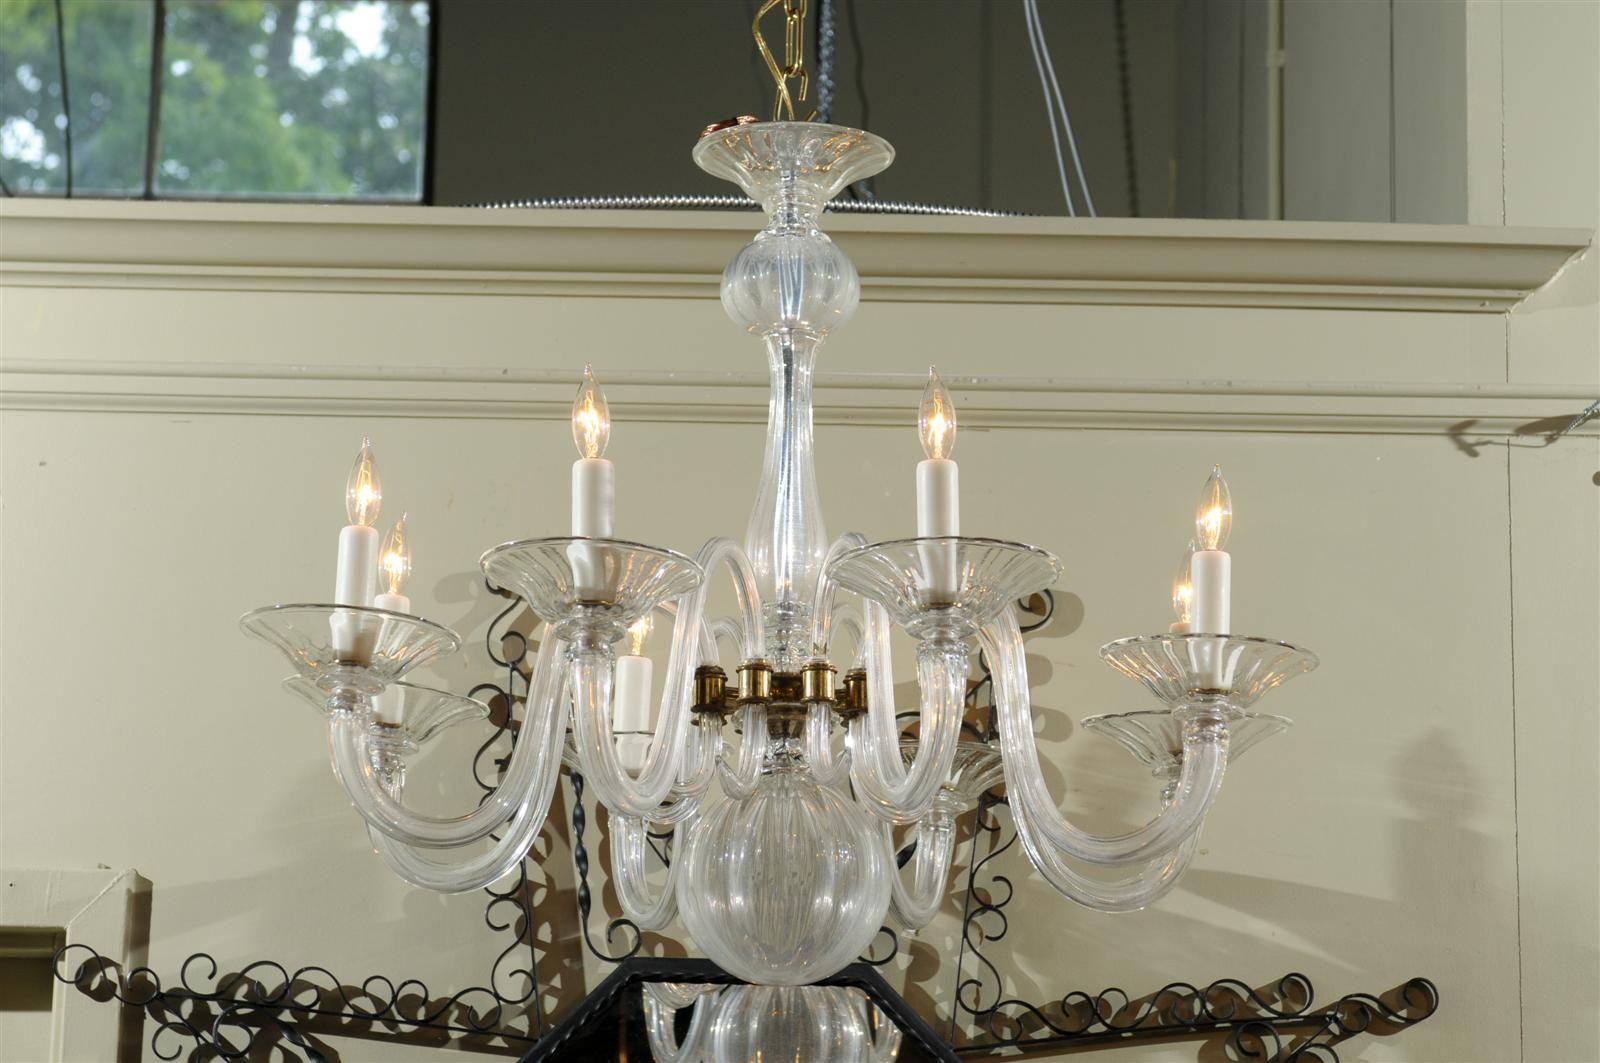 Mid 20th century eight-light Murano chandelier with scrolling arms ending in bell-form bobeches supported by a globular-form center, with gilt accents throughout.